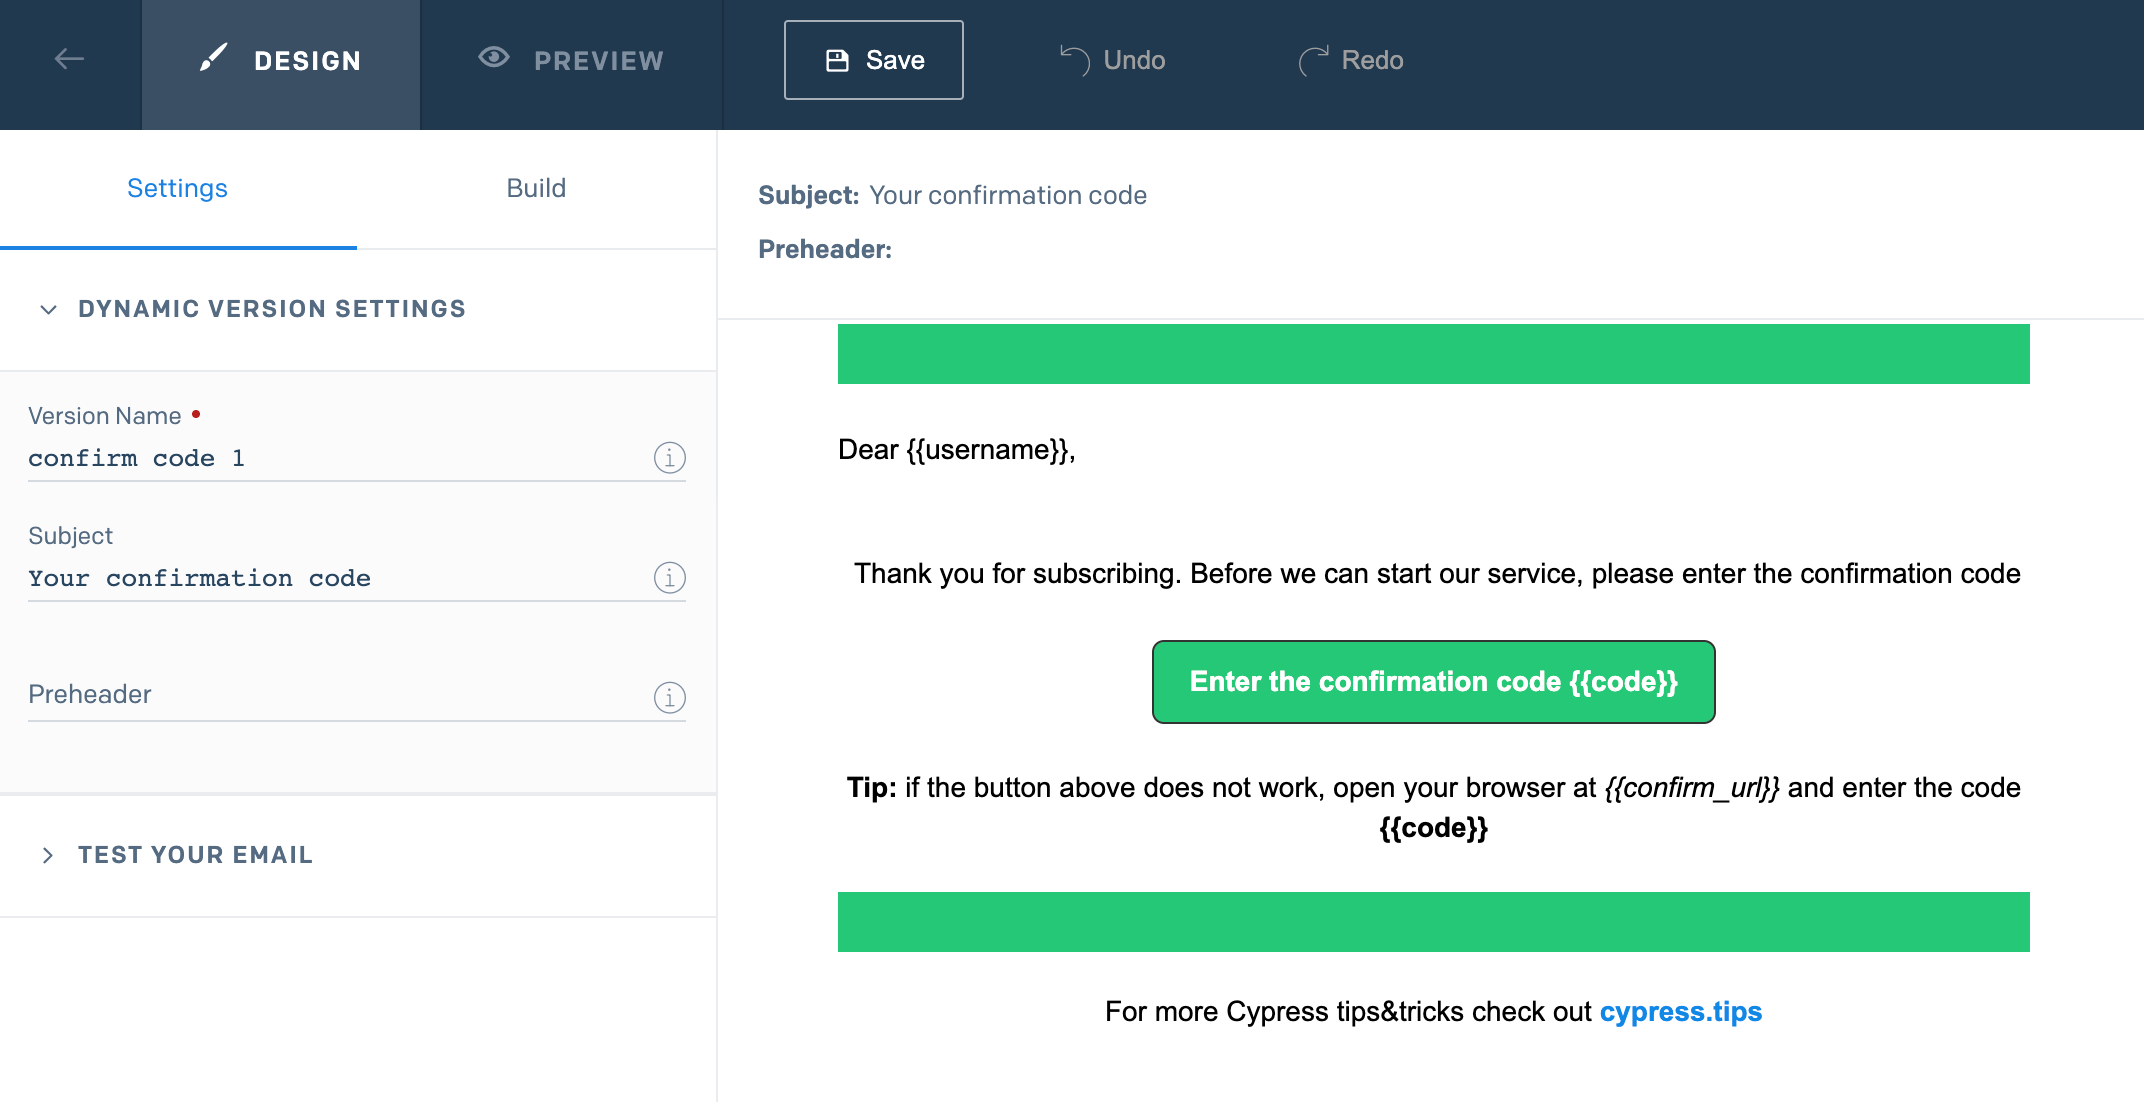 SendGrid email design built from a library of components